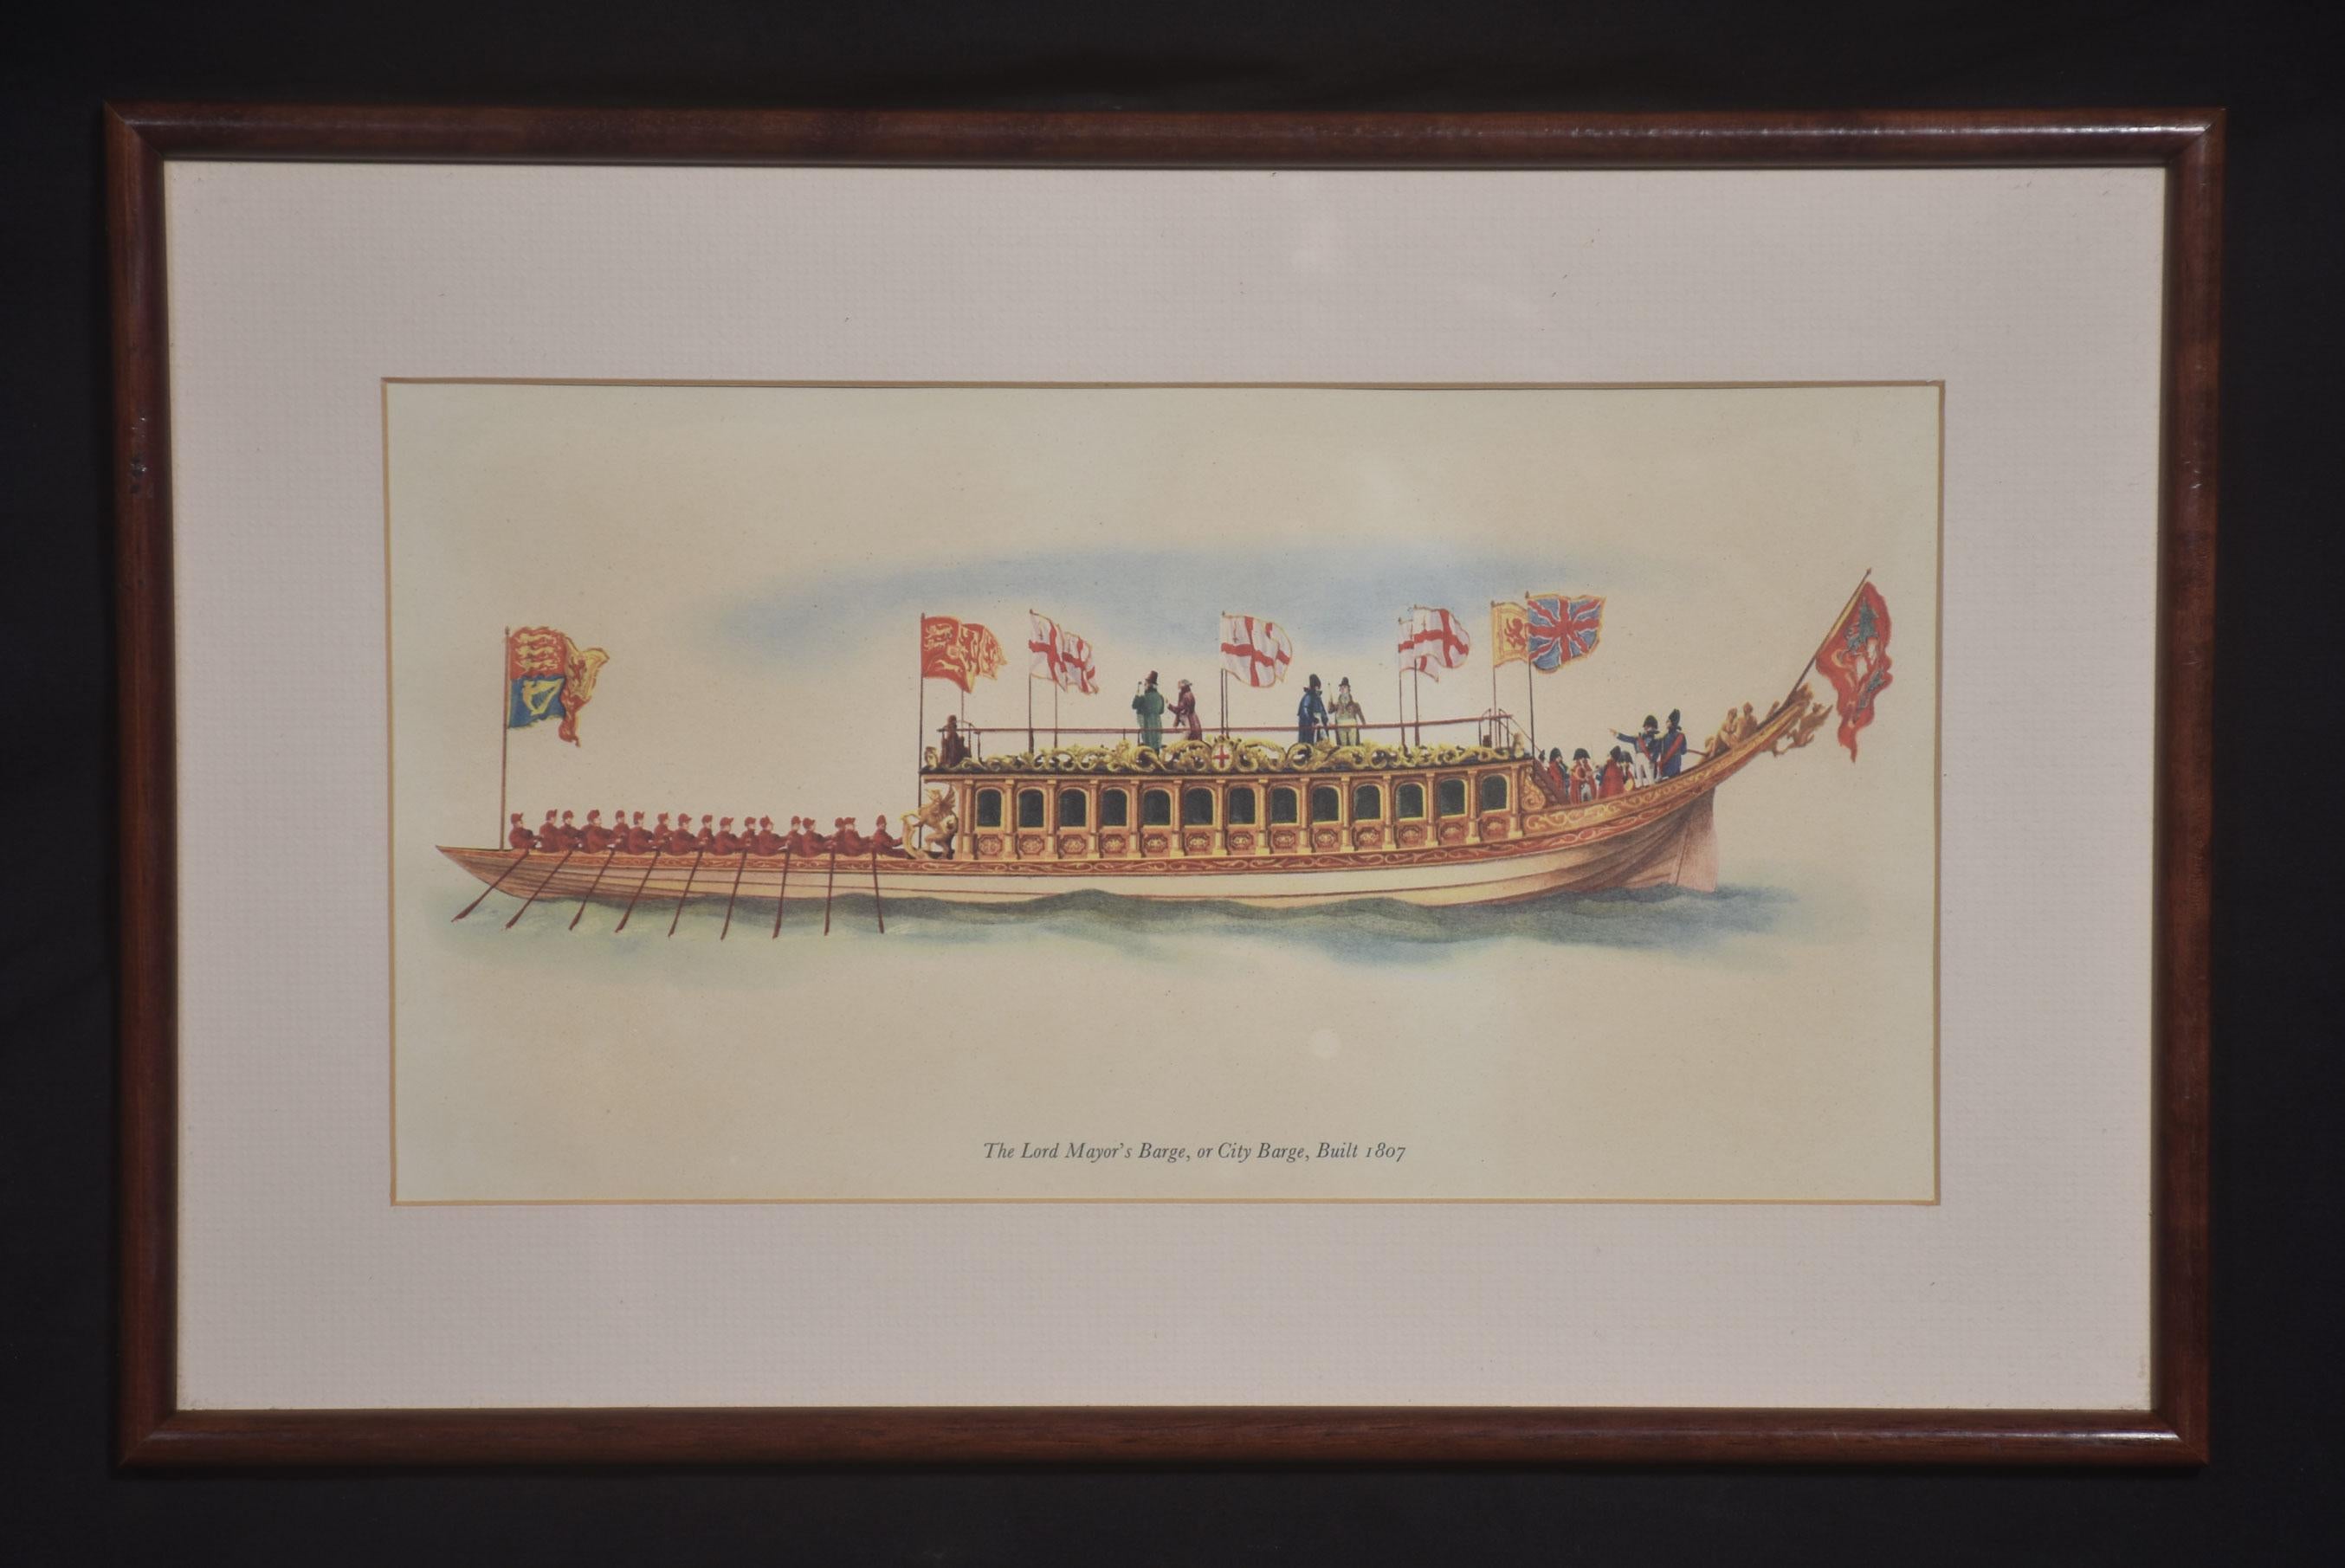 Set of Nine Livery Company Barges Lithographs encased in mahogany glazed frames.
Frame Dimensions
Height 12 Inches
Width 18.5 Inches
Depth 1 Inch